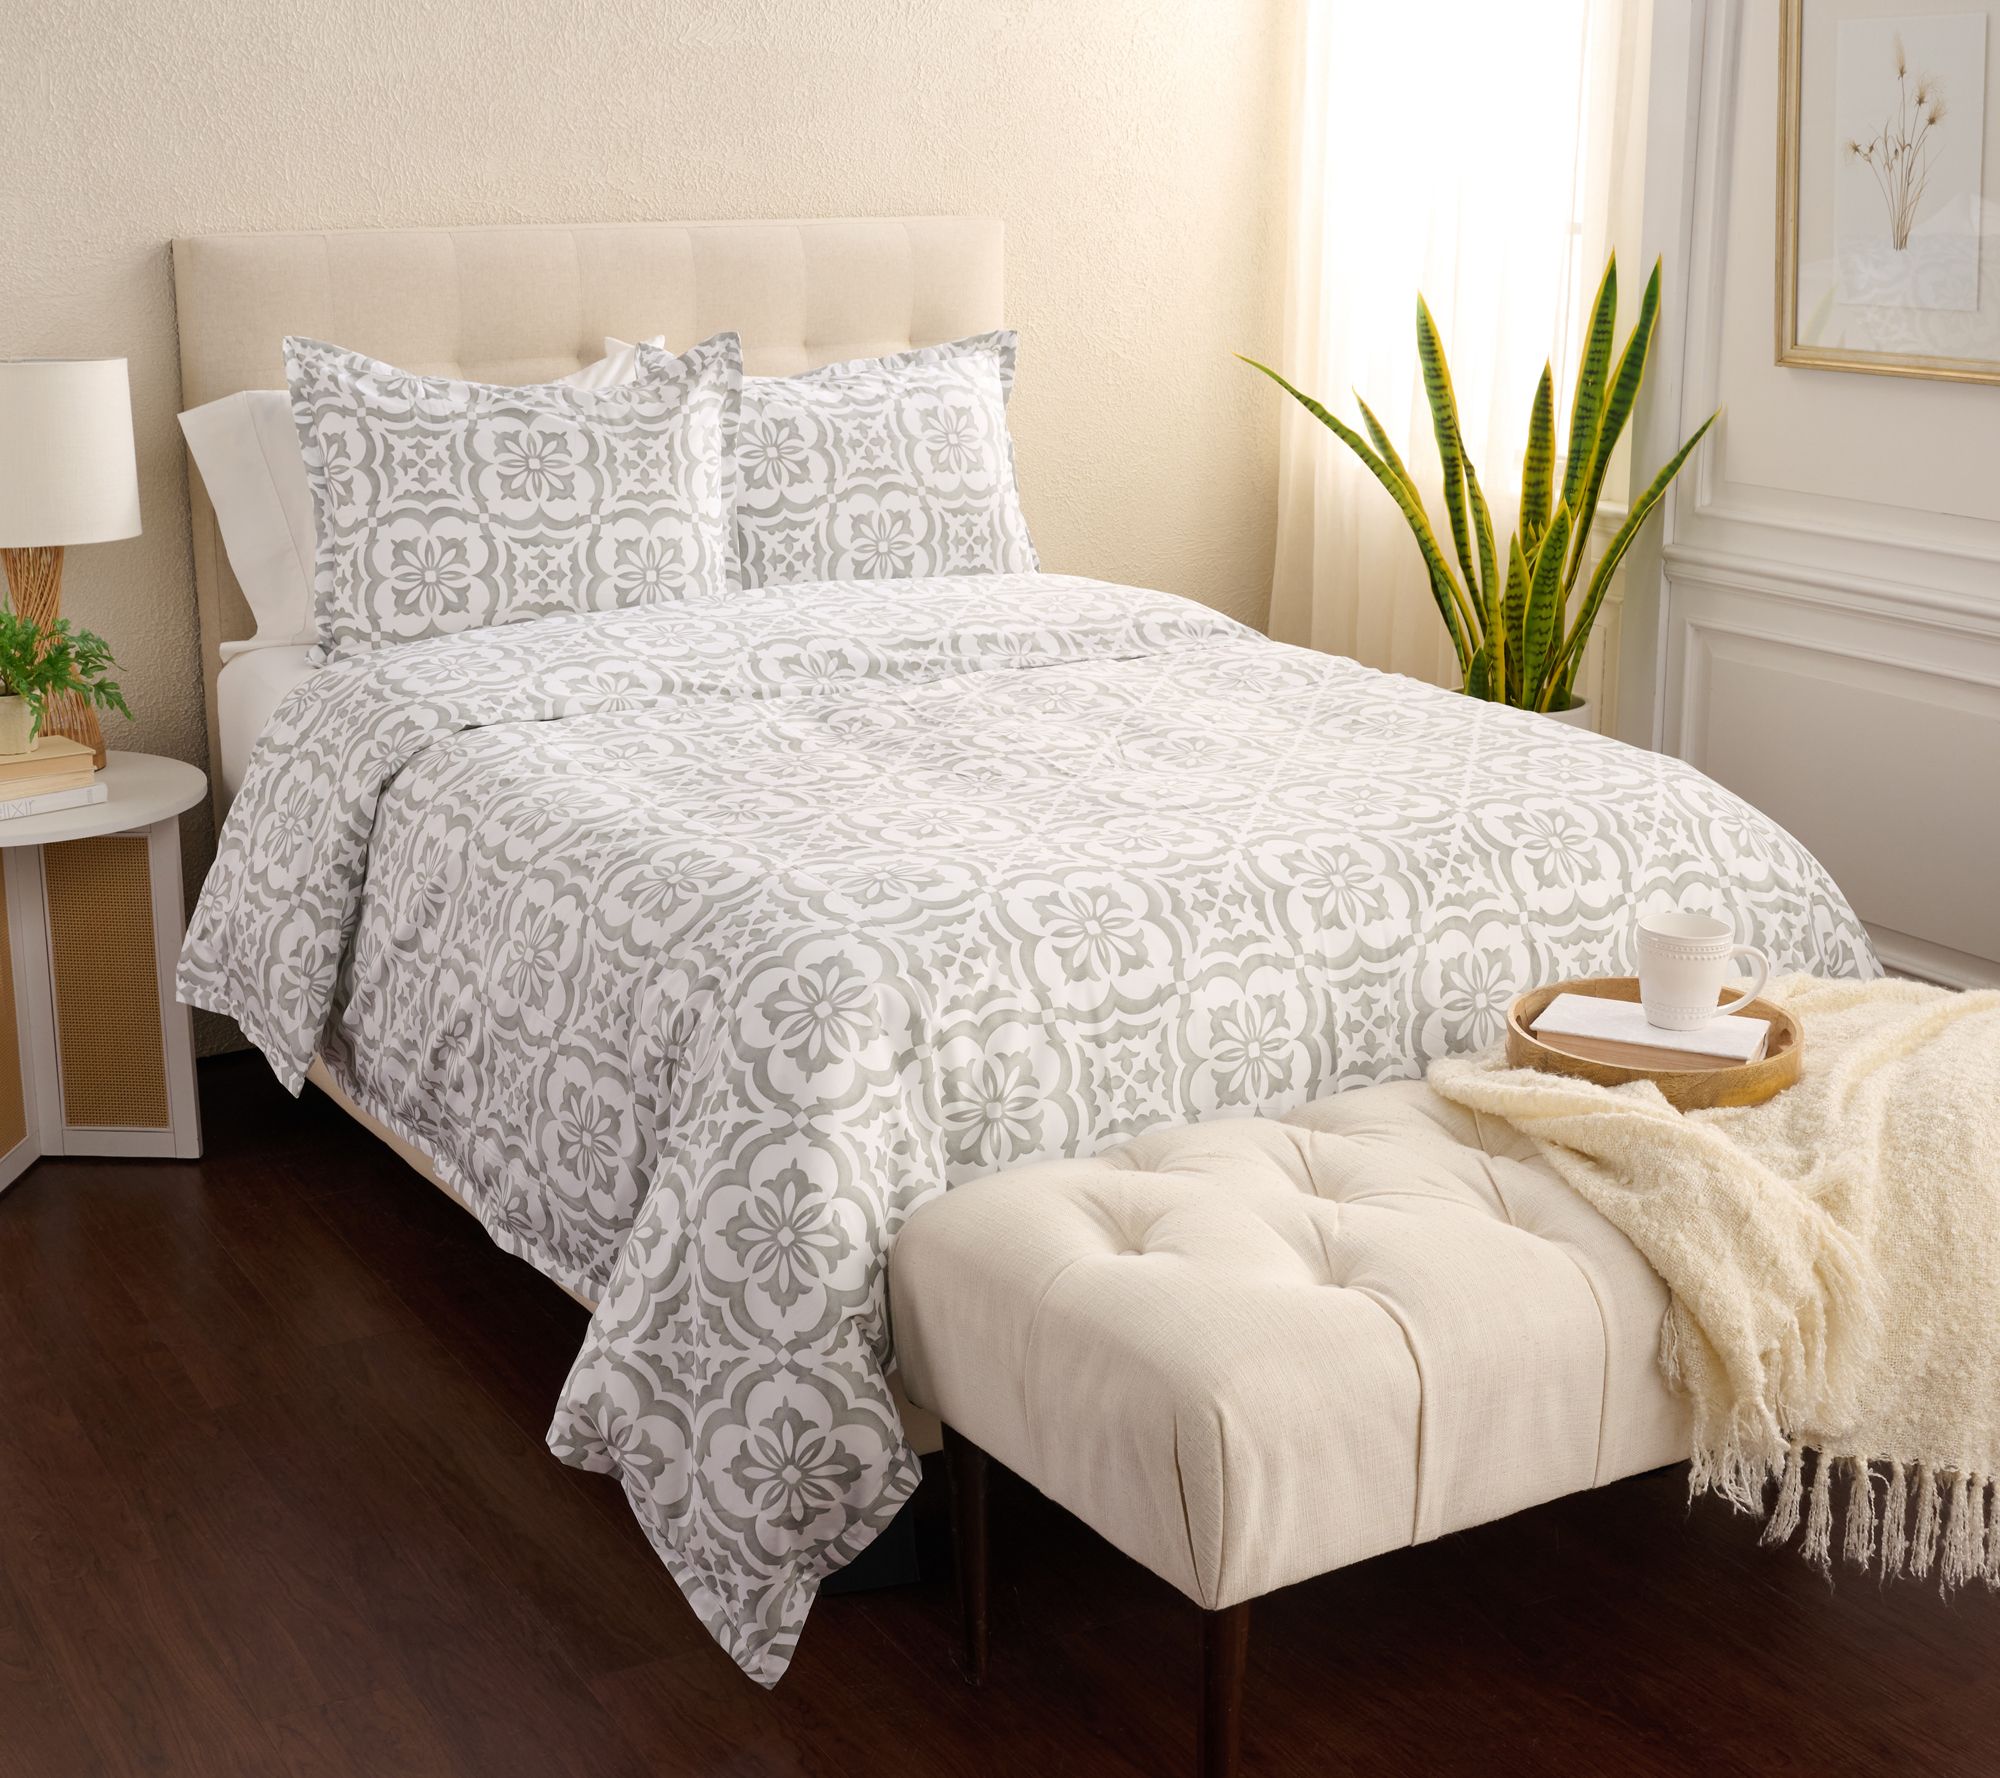 Queen - Bedding Sets - For the Home 